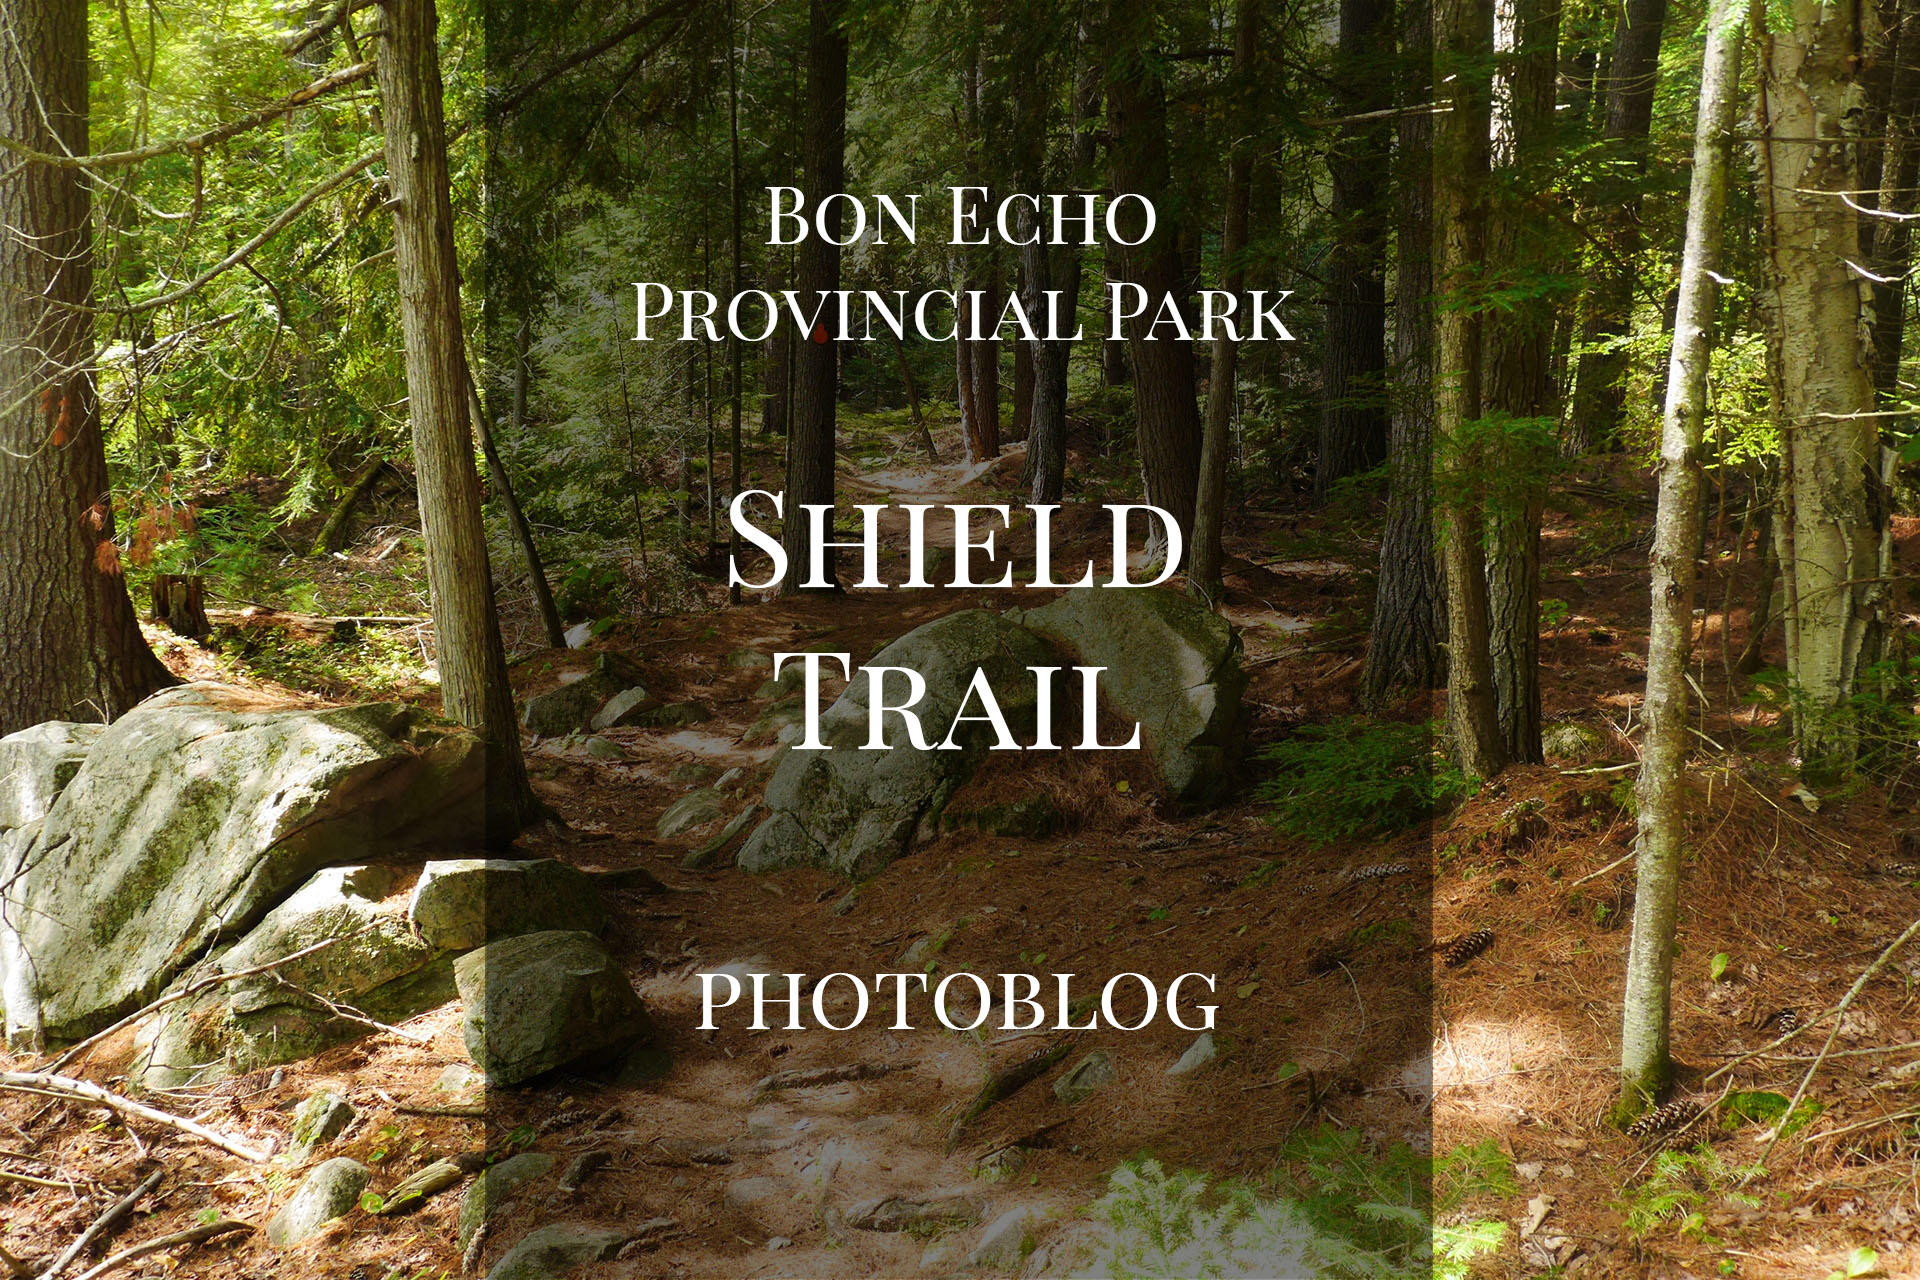 Pioneer History on The Shield Trail in Bon Echo Provincial Park